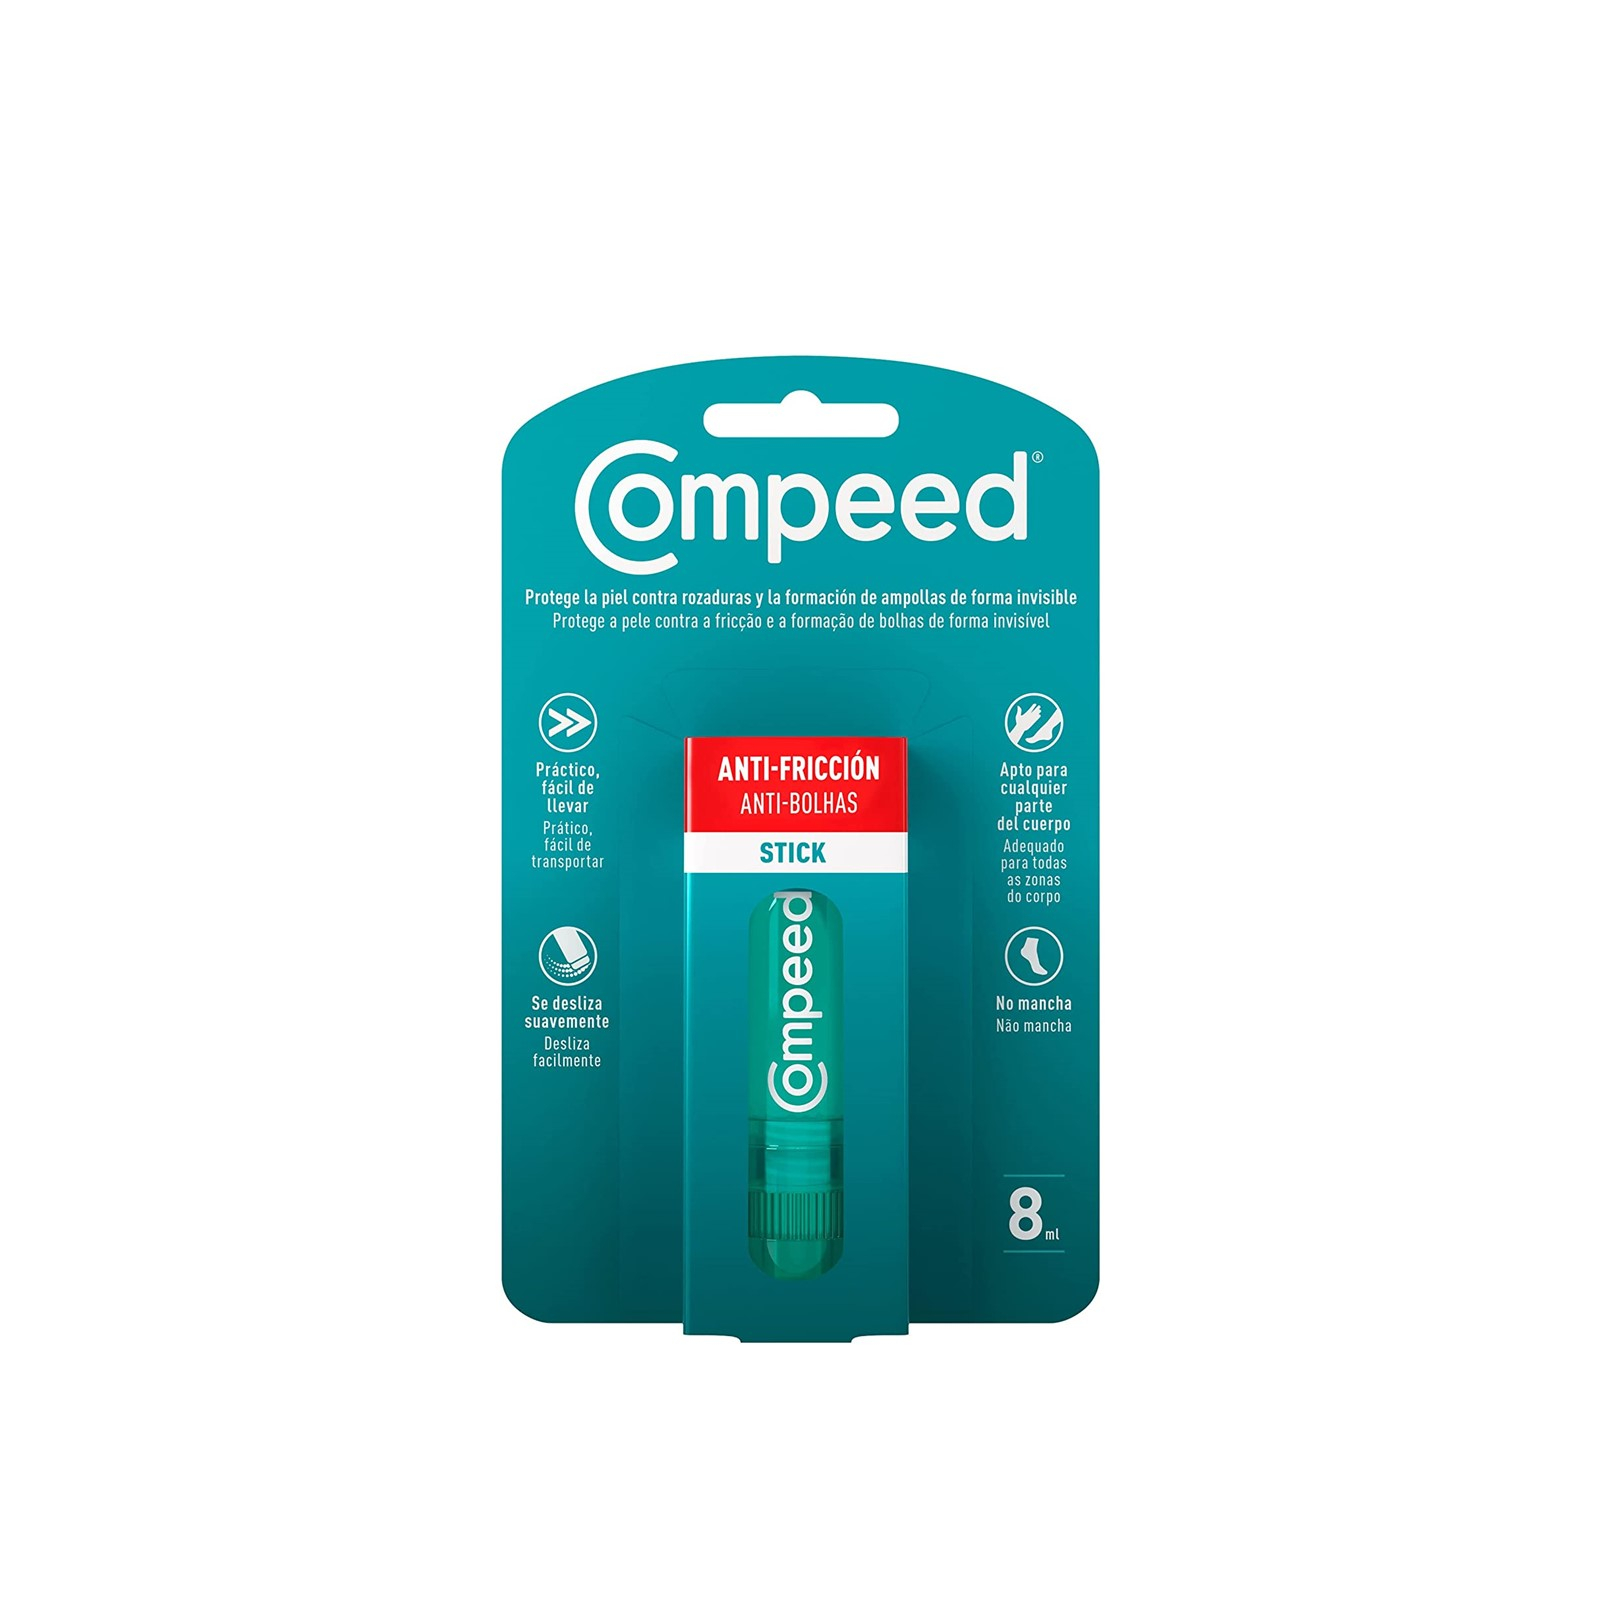 COMPEED Anti Blister Stick Prevented Blisters And Chafing On Feet Care  Invisibly Protection Cream Relive Pain Convenient Foot